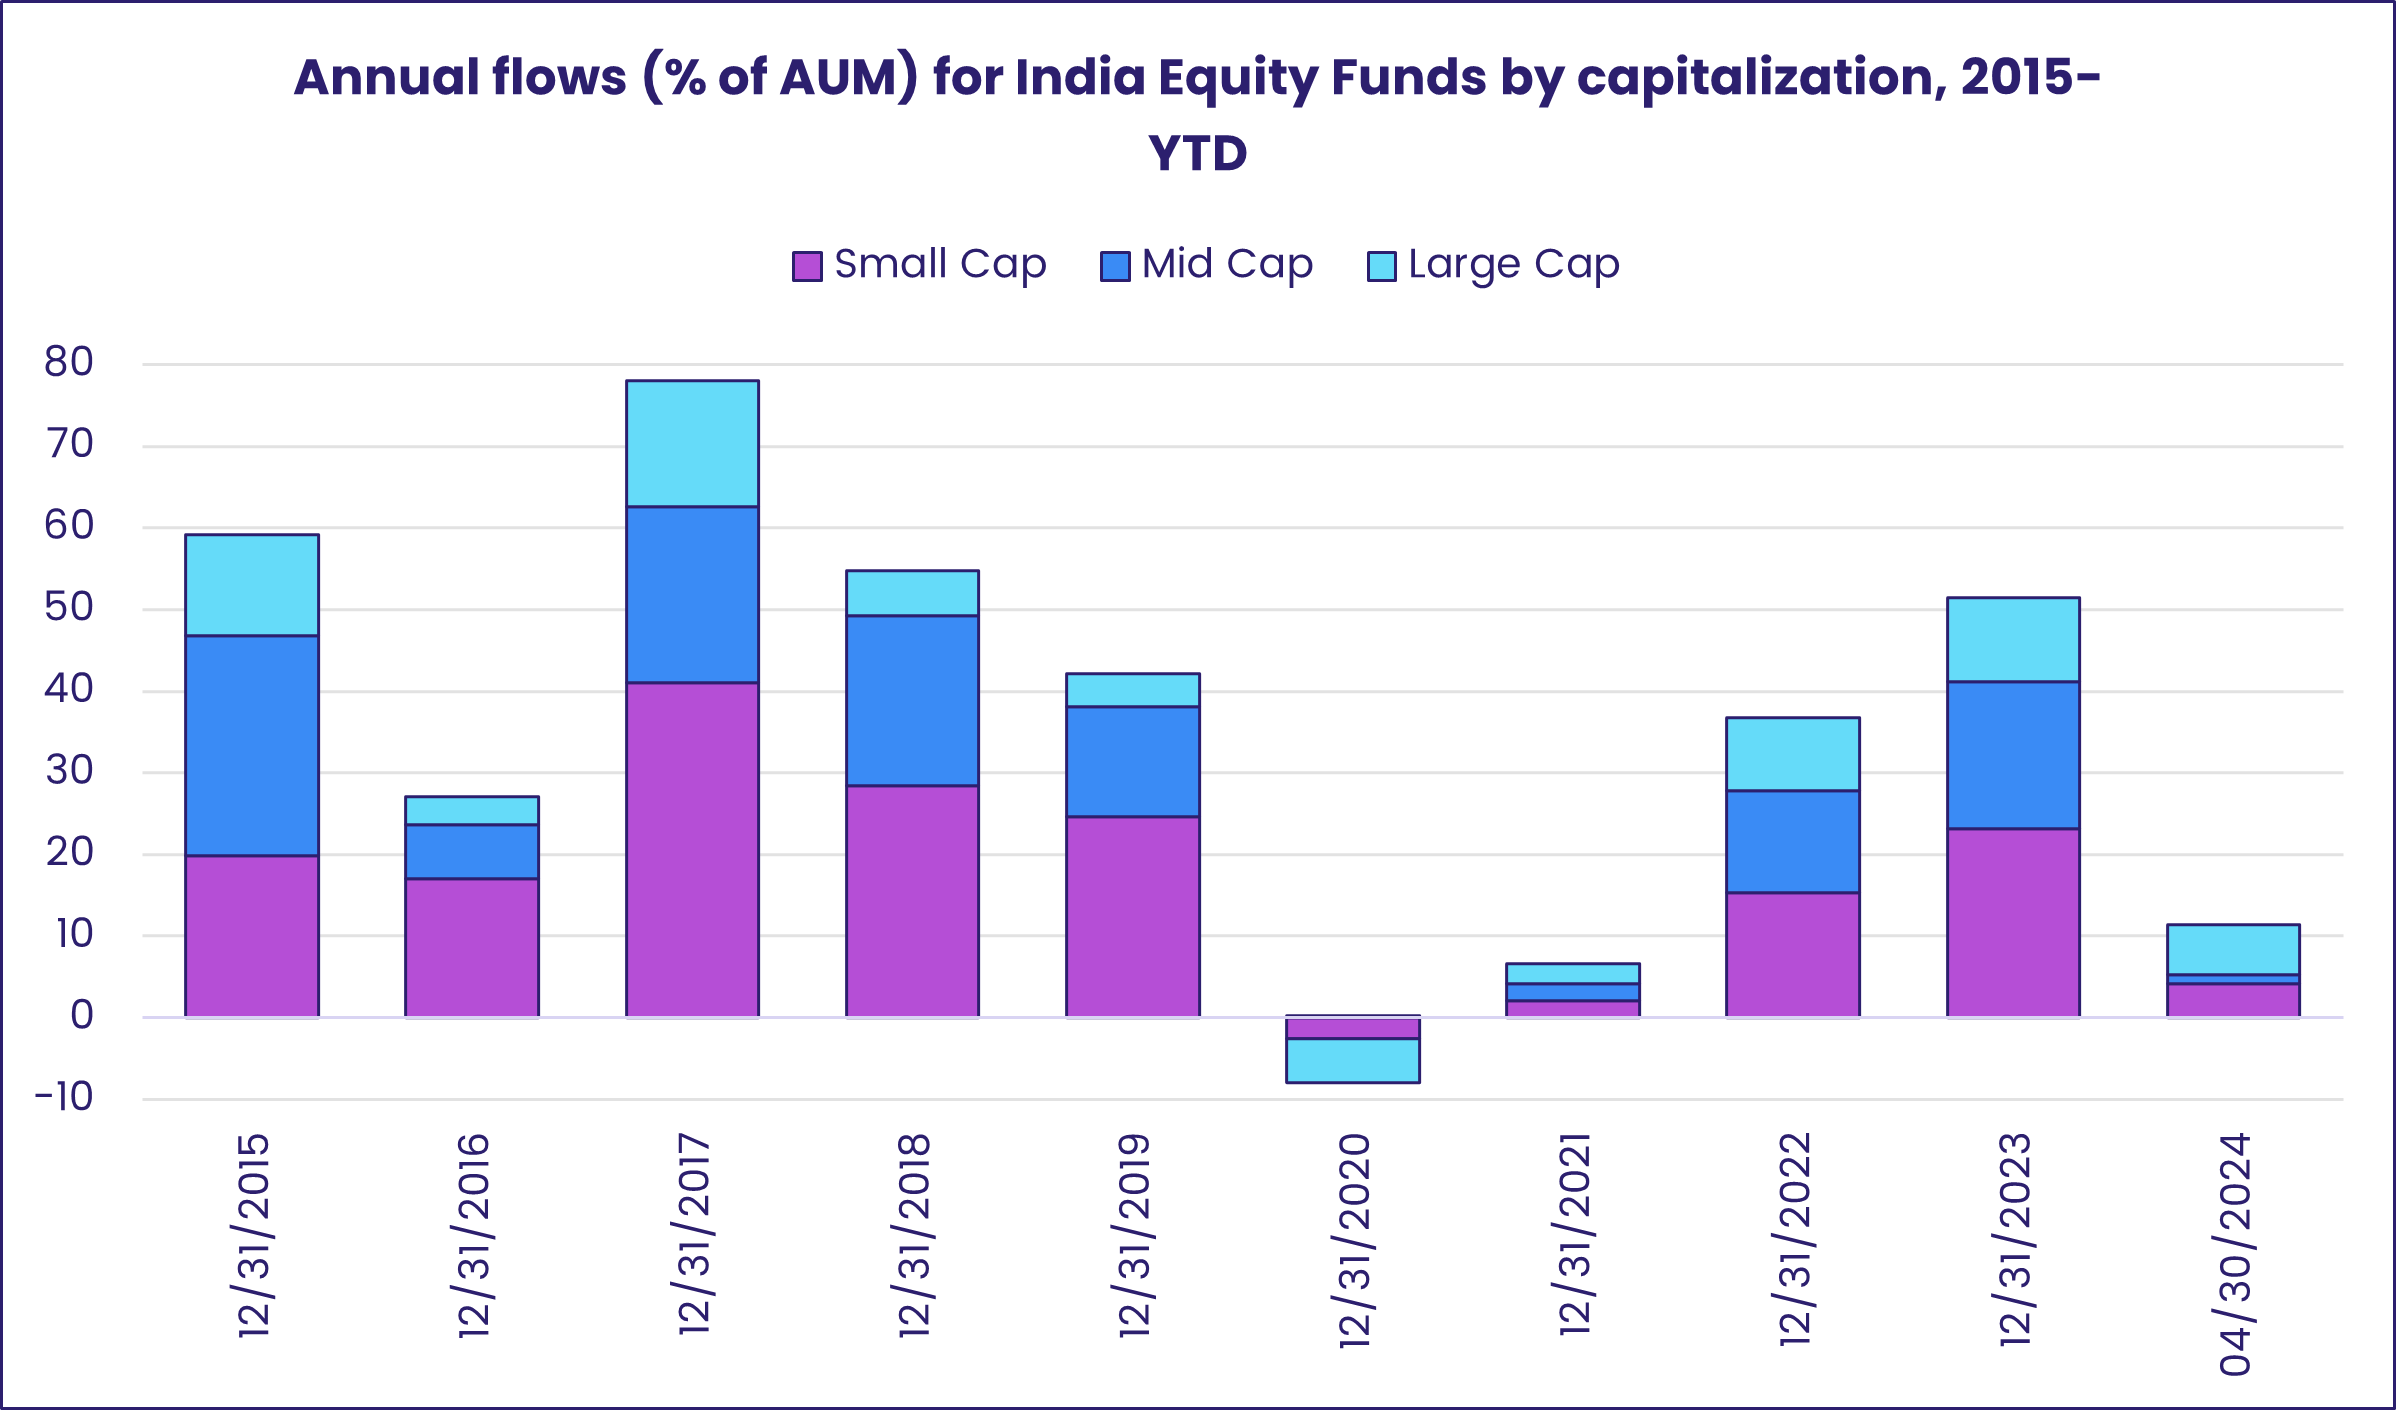 Chart representing 'Annual flows (% of AUM) for India Equity Funds by capitalization, 2015-YTD'